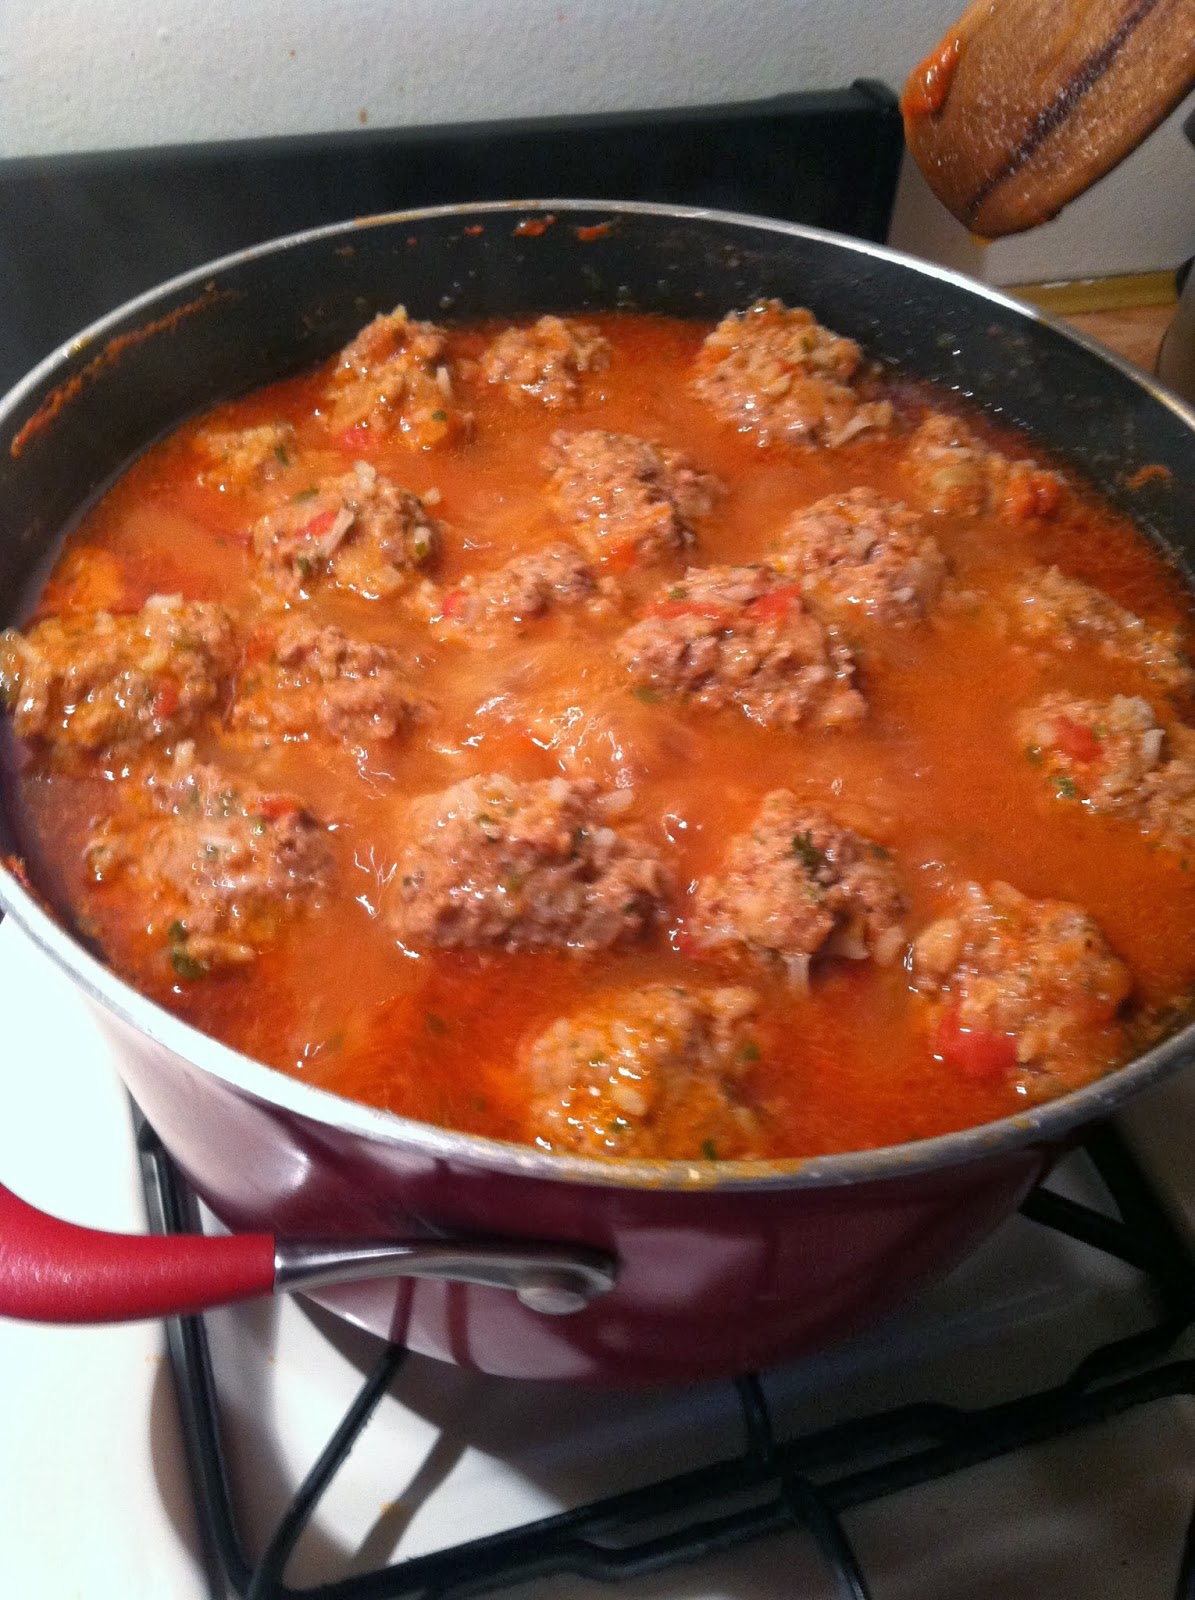 Made from Home Daily: Albondigas...Mexican Meatball Soup